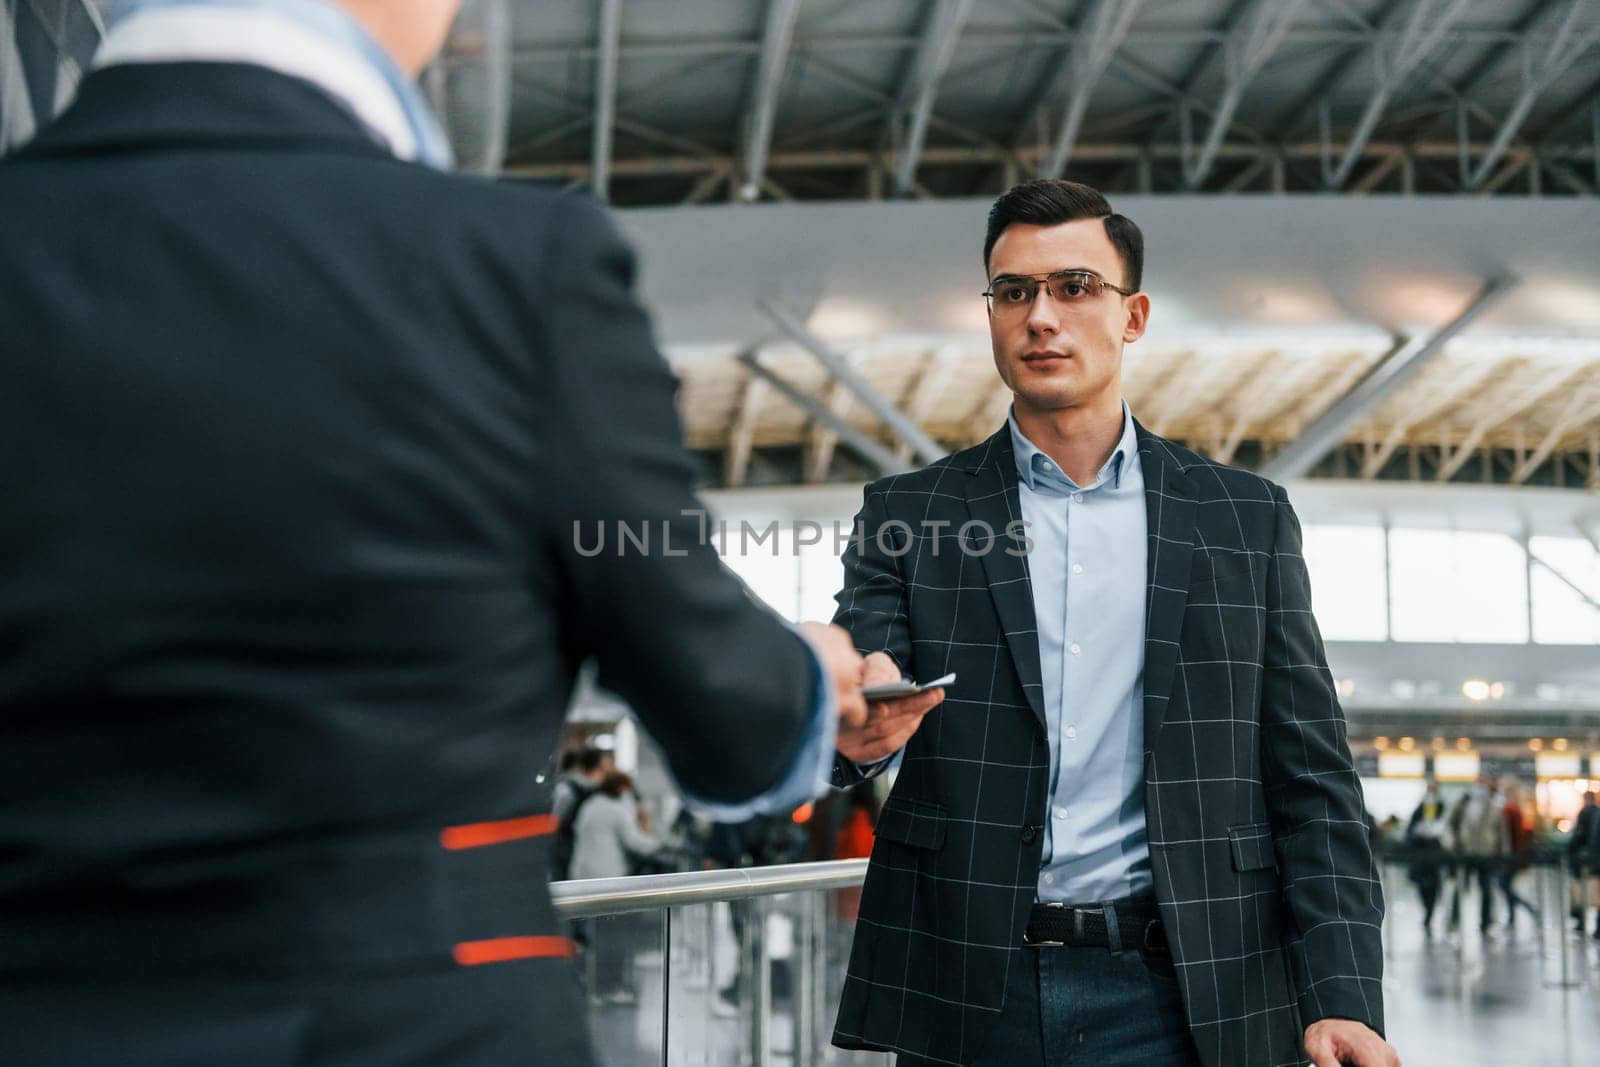 Giving the documents. Young businessman in formal clothes is in the airport at daytime by Standret